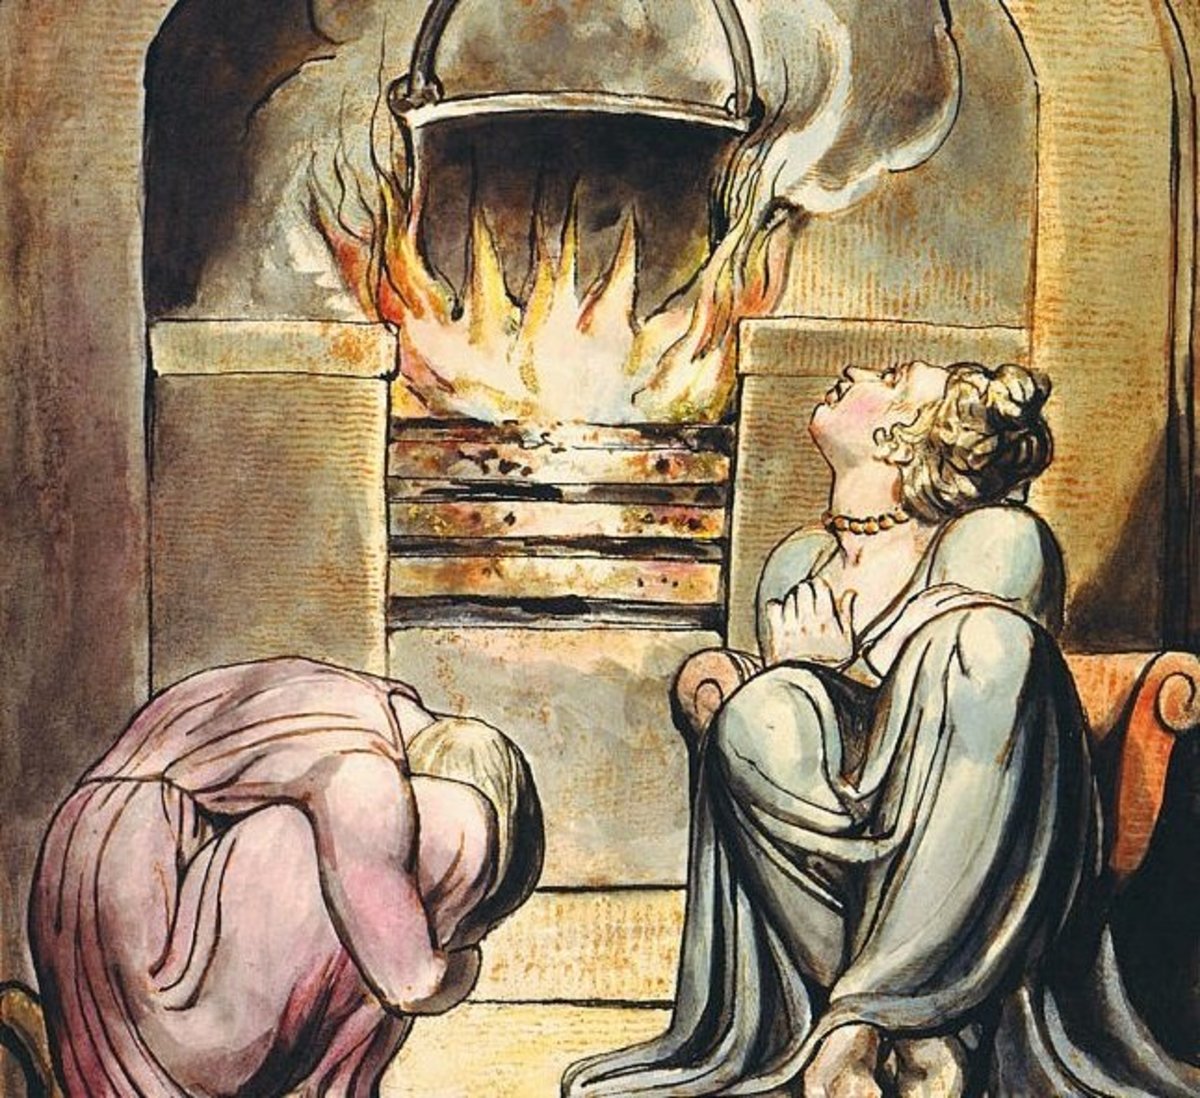 European folk magic: a cauldron over a fire in William Blake's illustrations to his mythical "Europe, a Prophecy," first published in 1794.